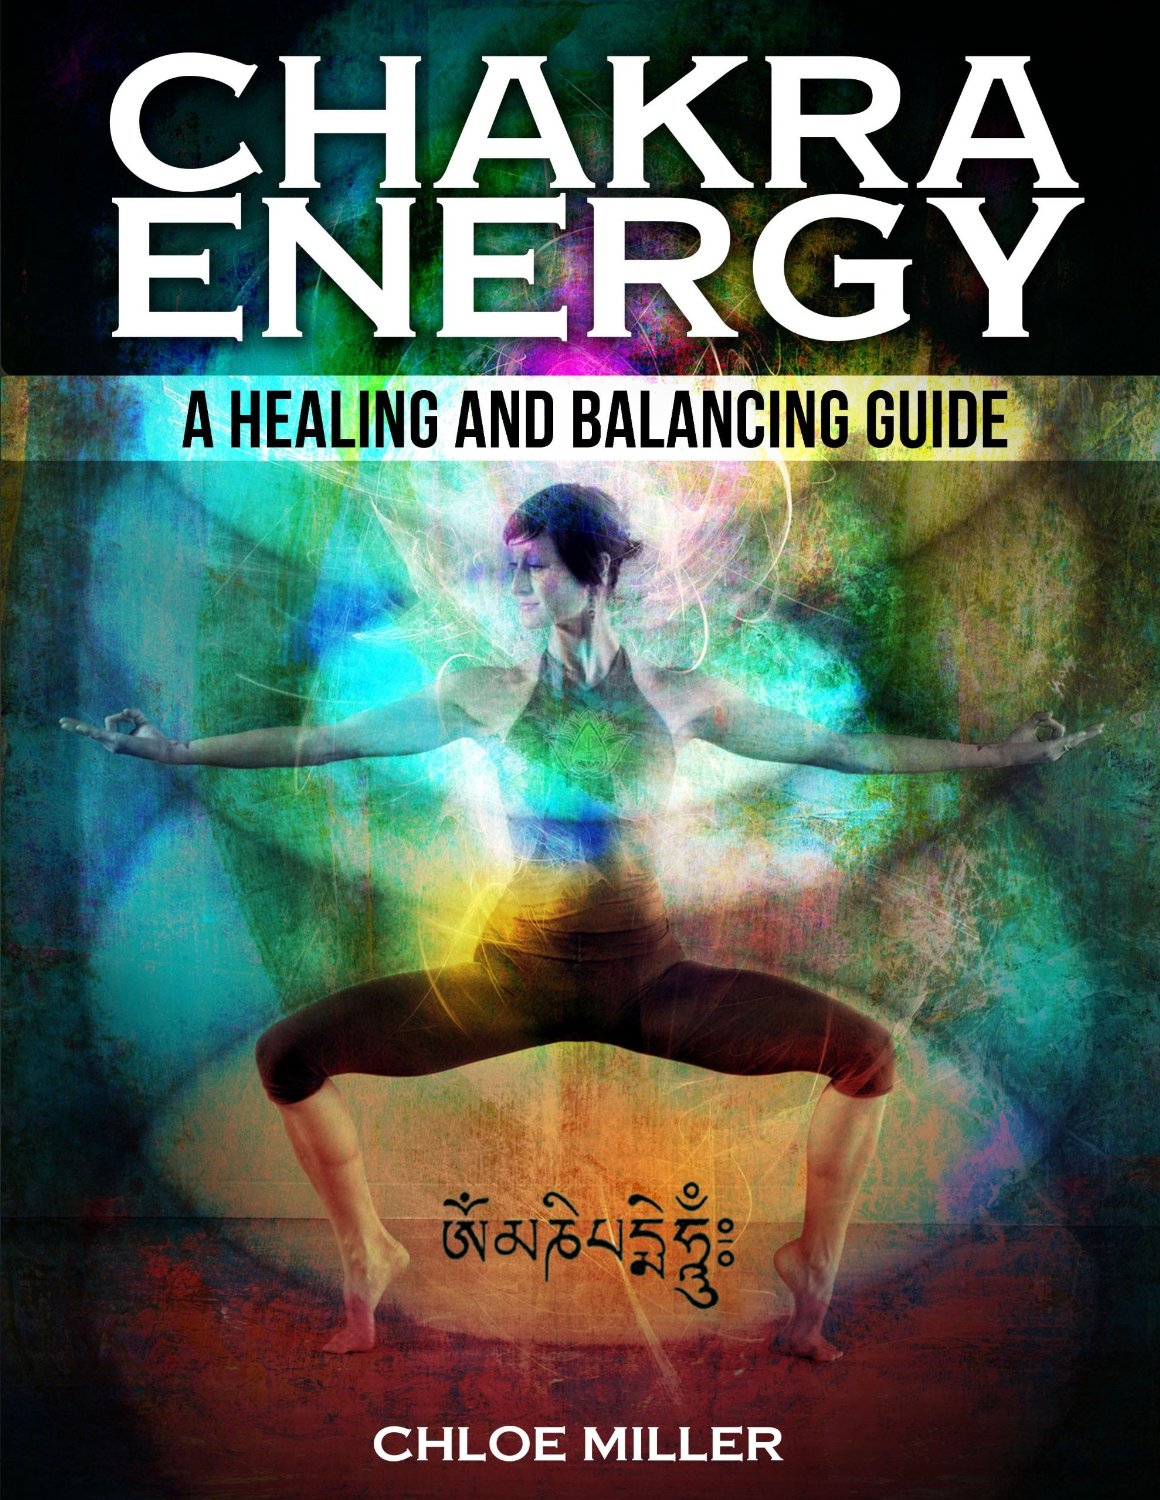 Chakra Energy – A Healing And Balancing Guide by Chloe Miller